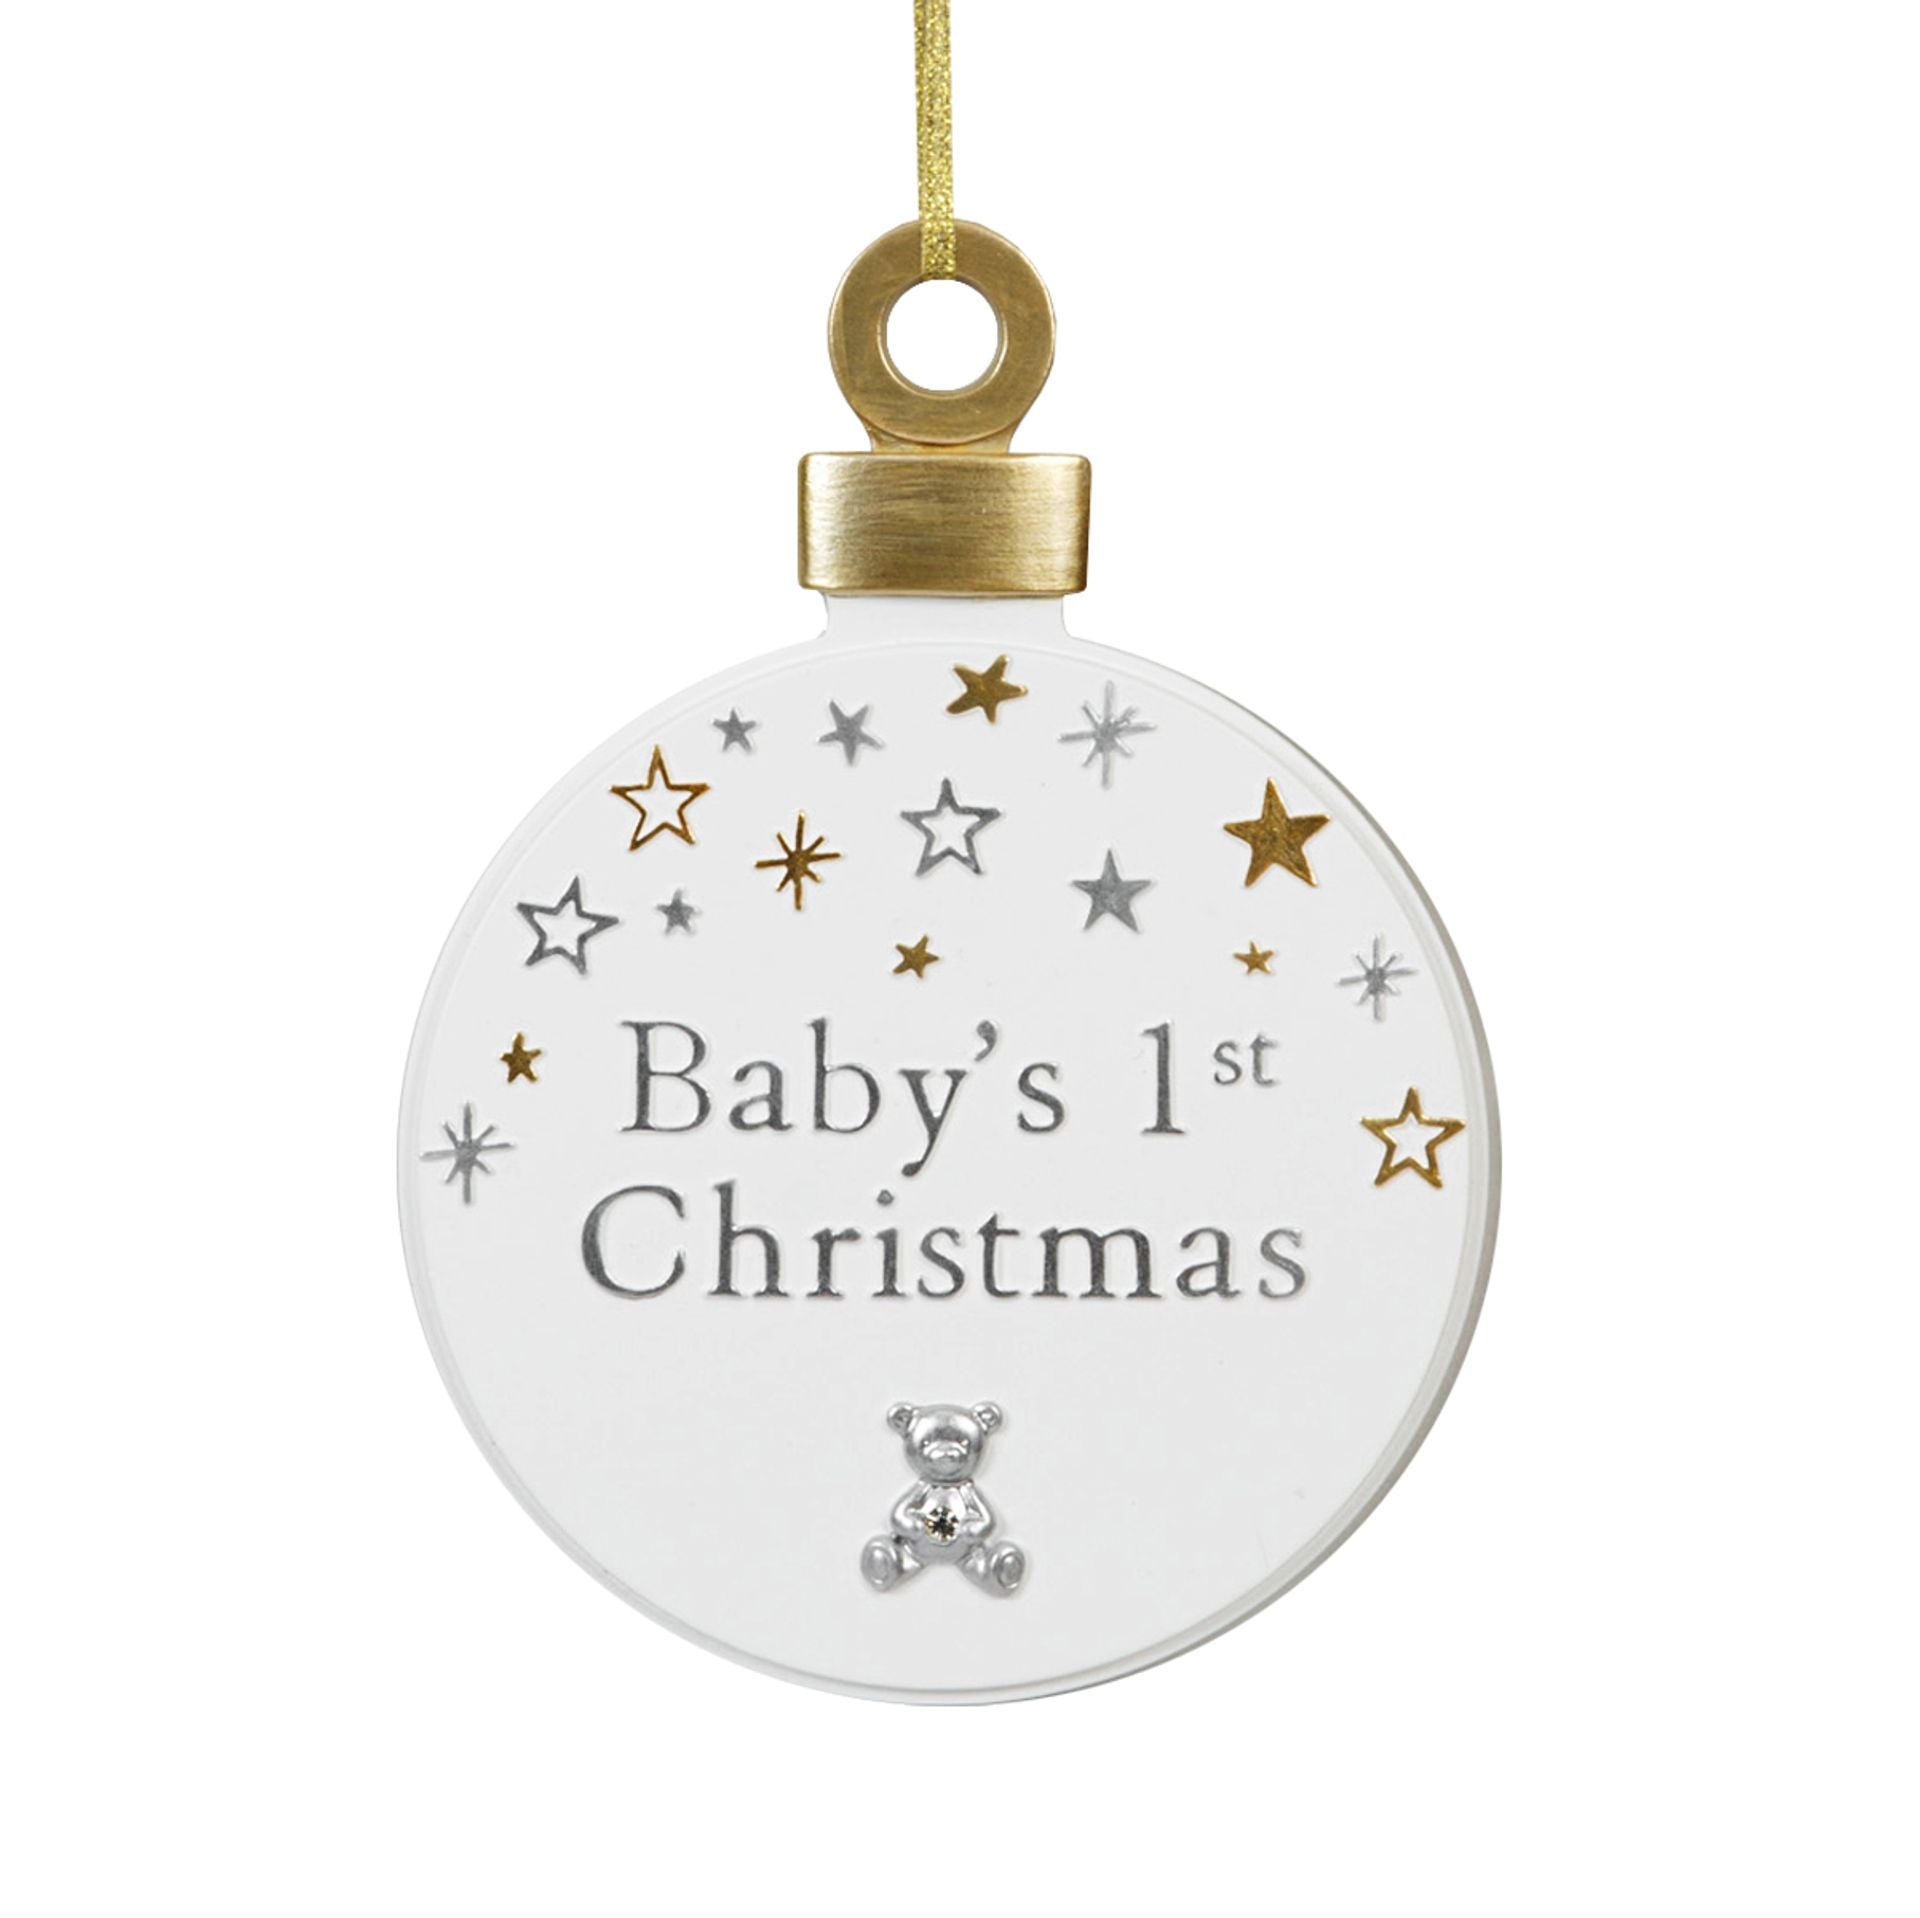 A beautiful decoration for the new arrival&#39;s first Christmas, our Baby’s 1st Christmas plaque is a charming addition to their tree.